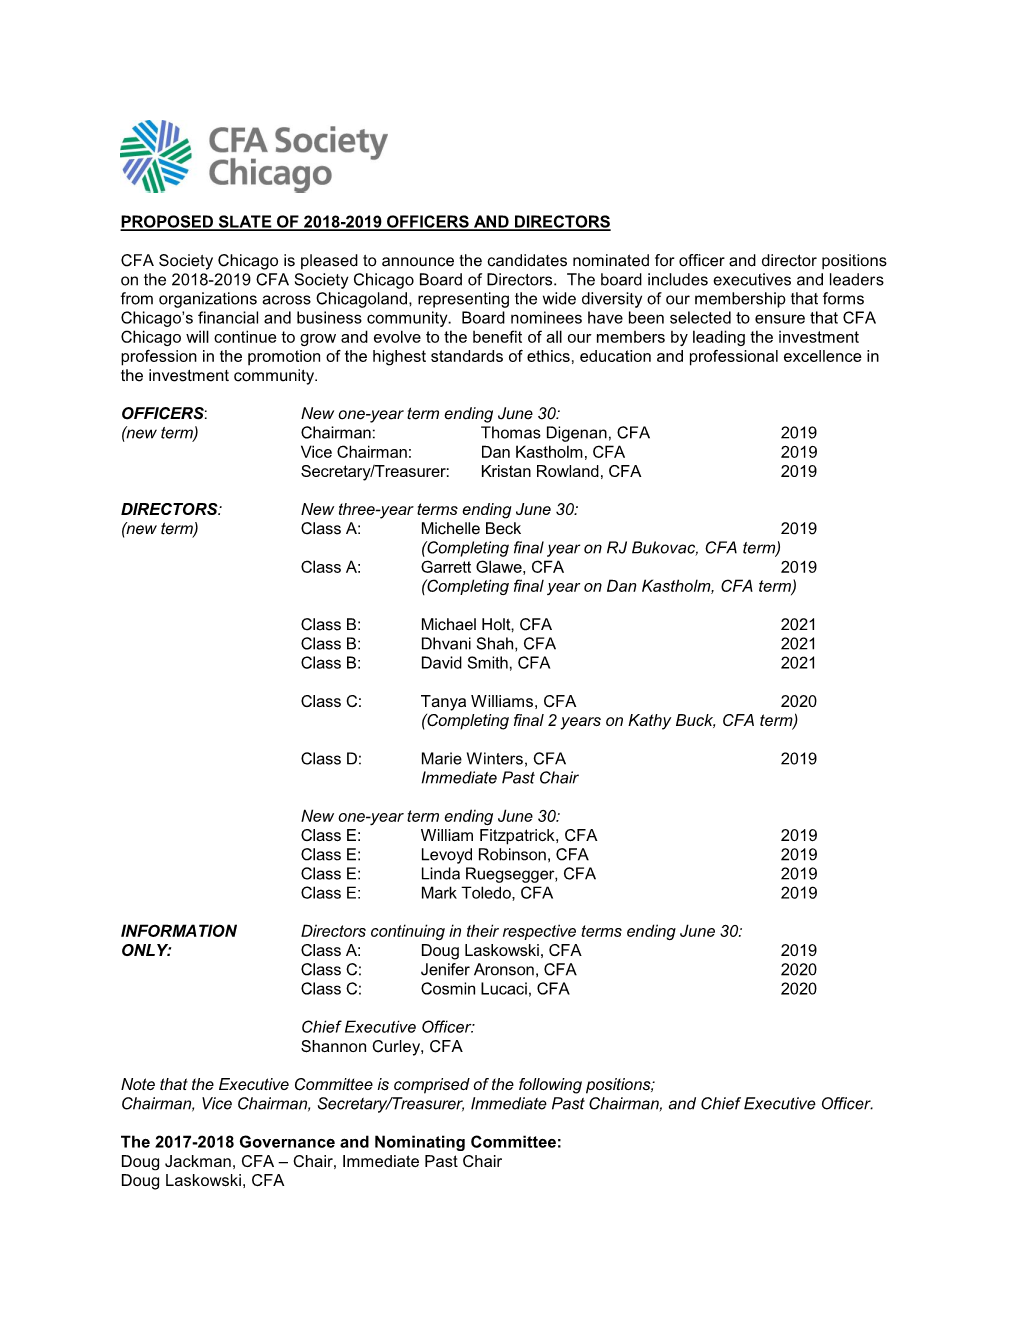 PROPOSED SLATE of 2018-2019 OFFICERS and DIRECTORS CFA Society Chicago Is Pleased to Announce the Candidates Nominated for Offic